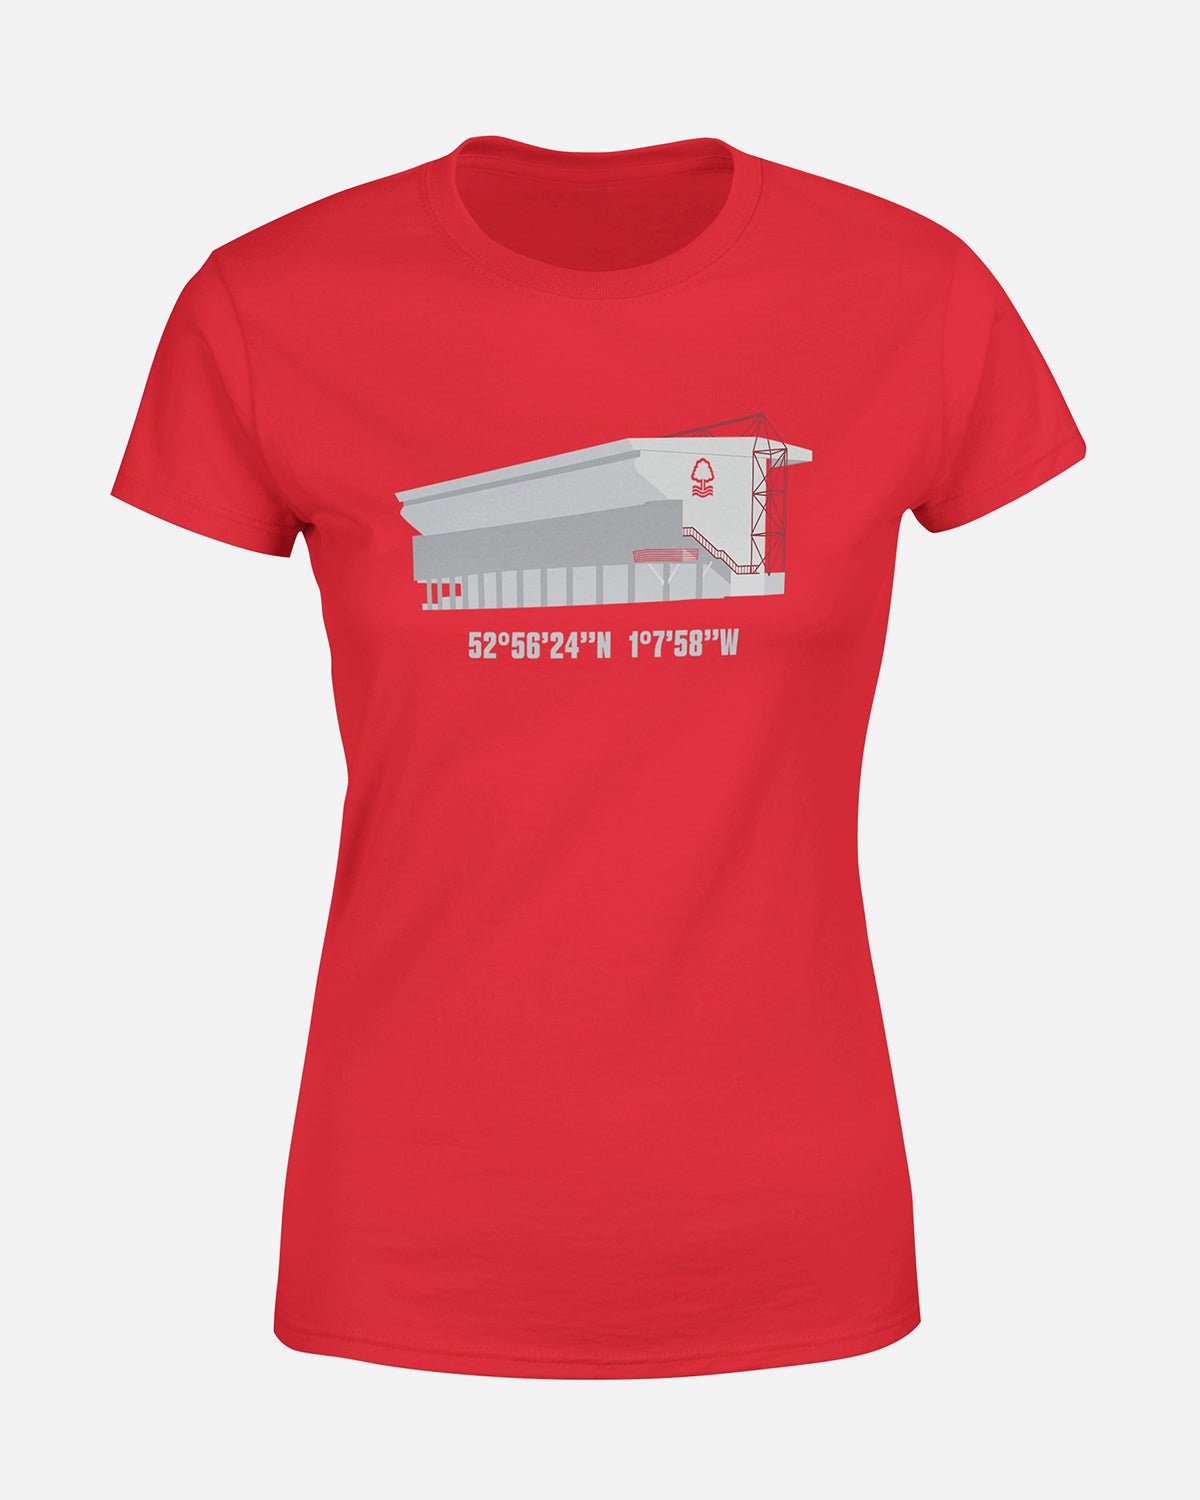 NFFC Women's Red Trent End T-Shirt - Nottingham Forest FC